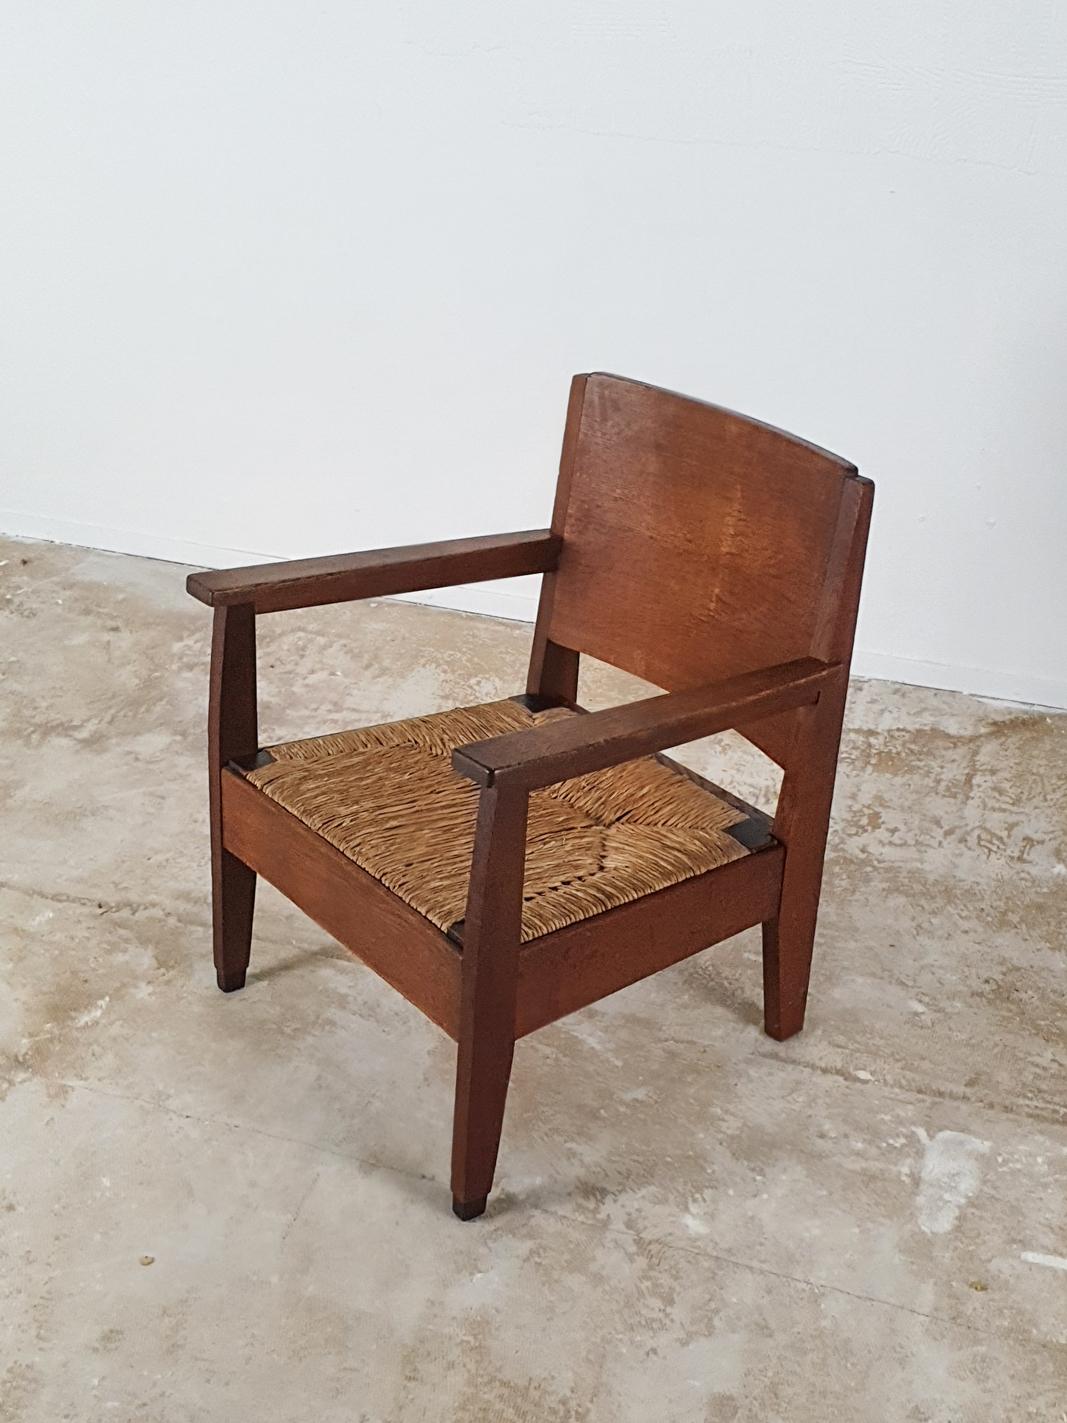 Wicker Low Chair by Frits Spanjaard 'Attributed'